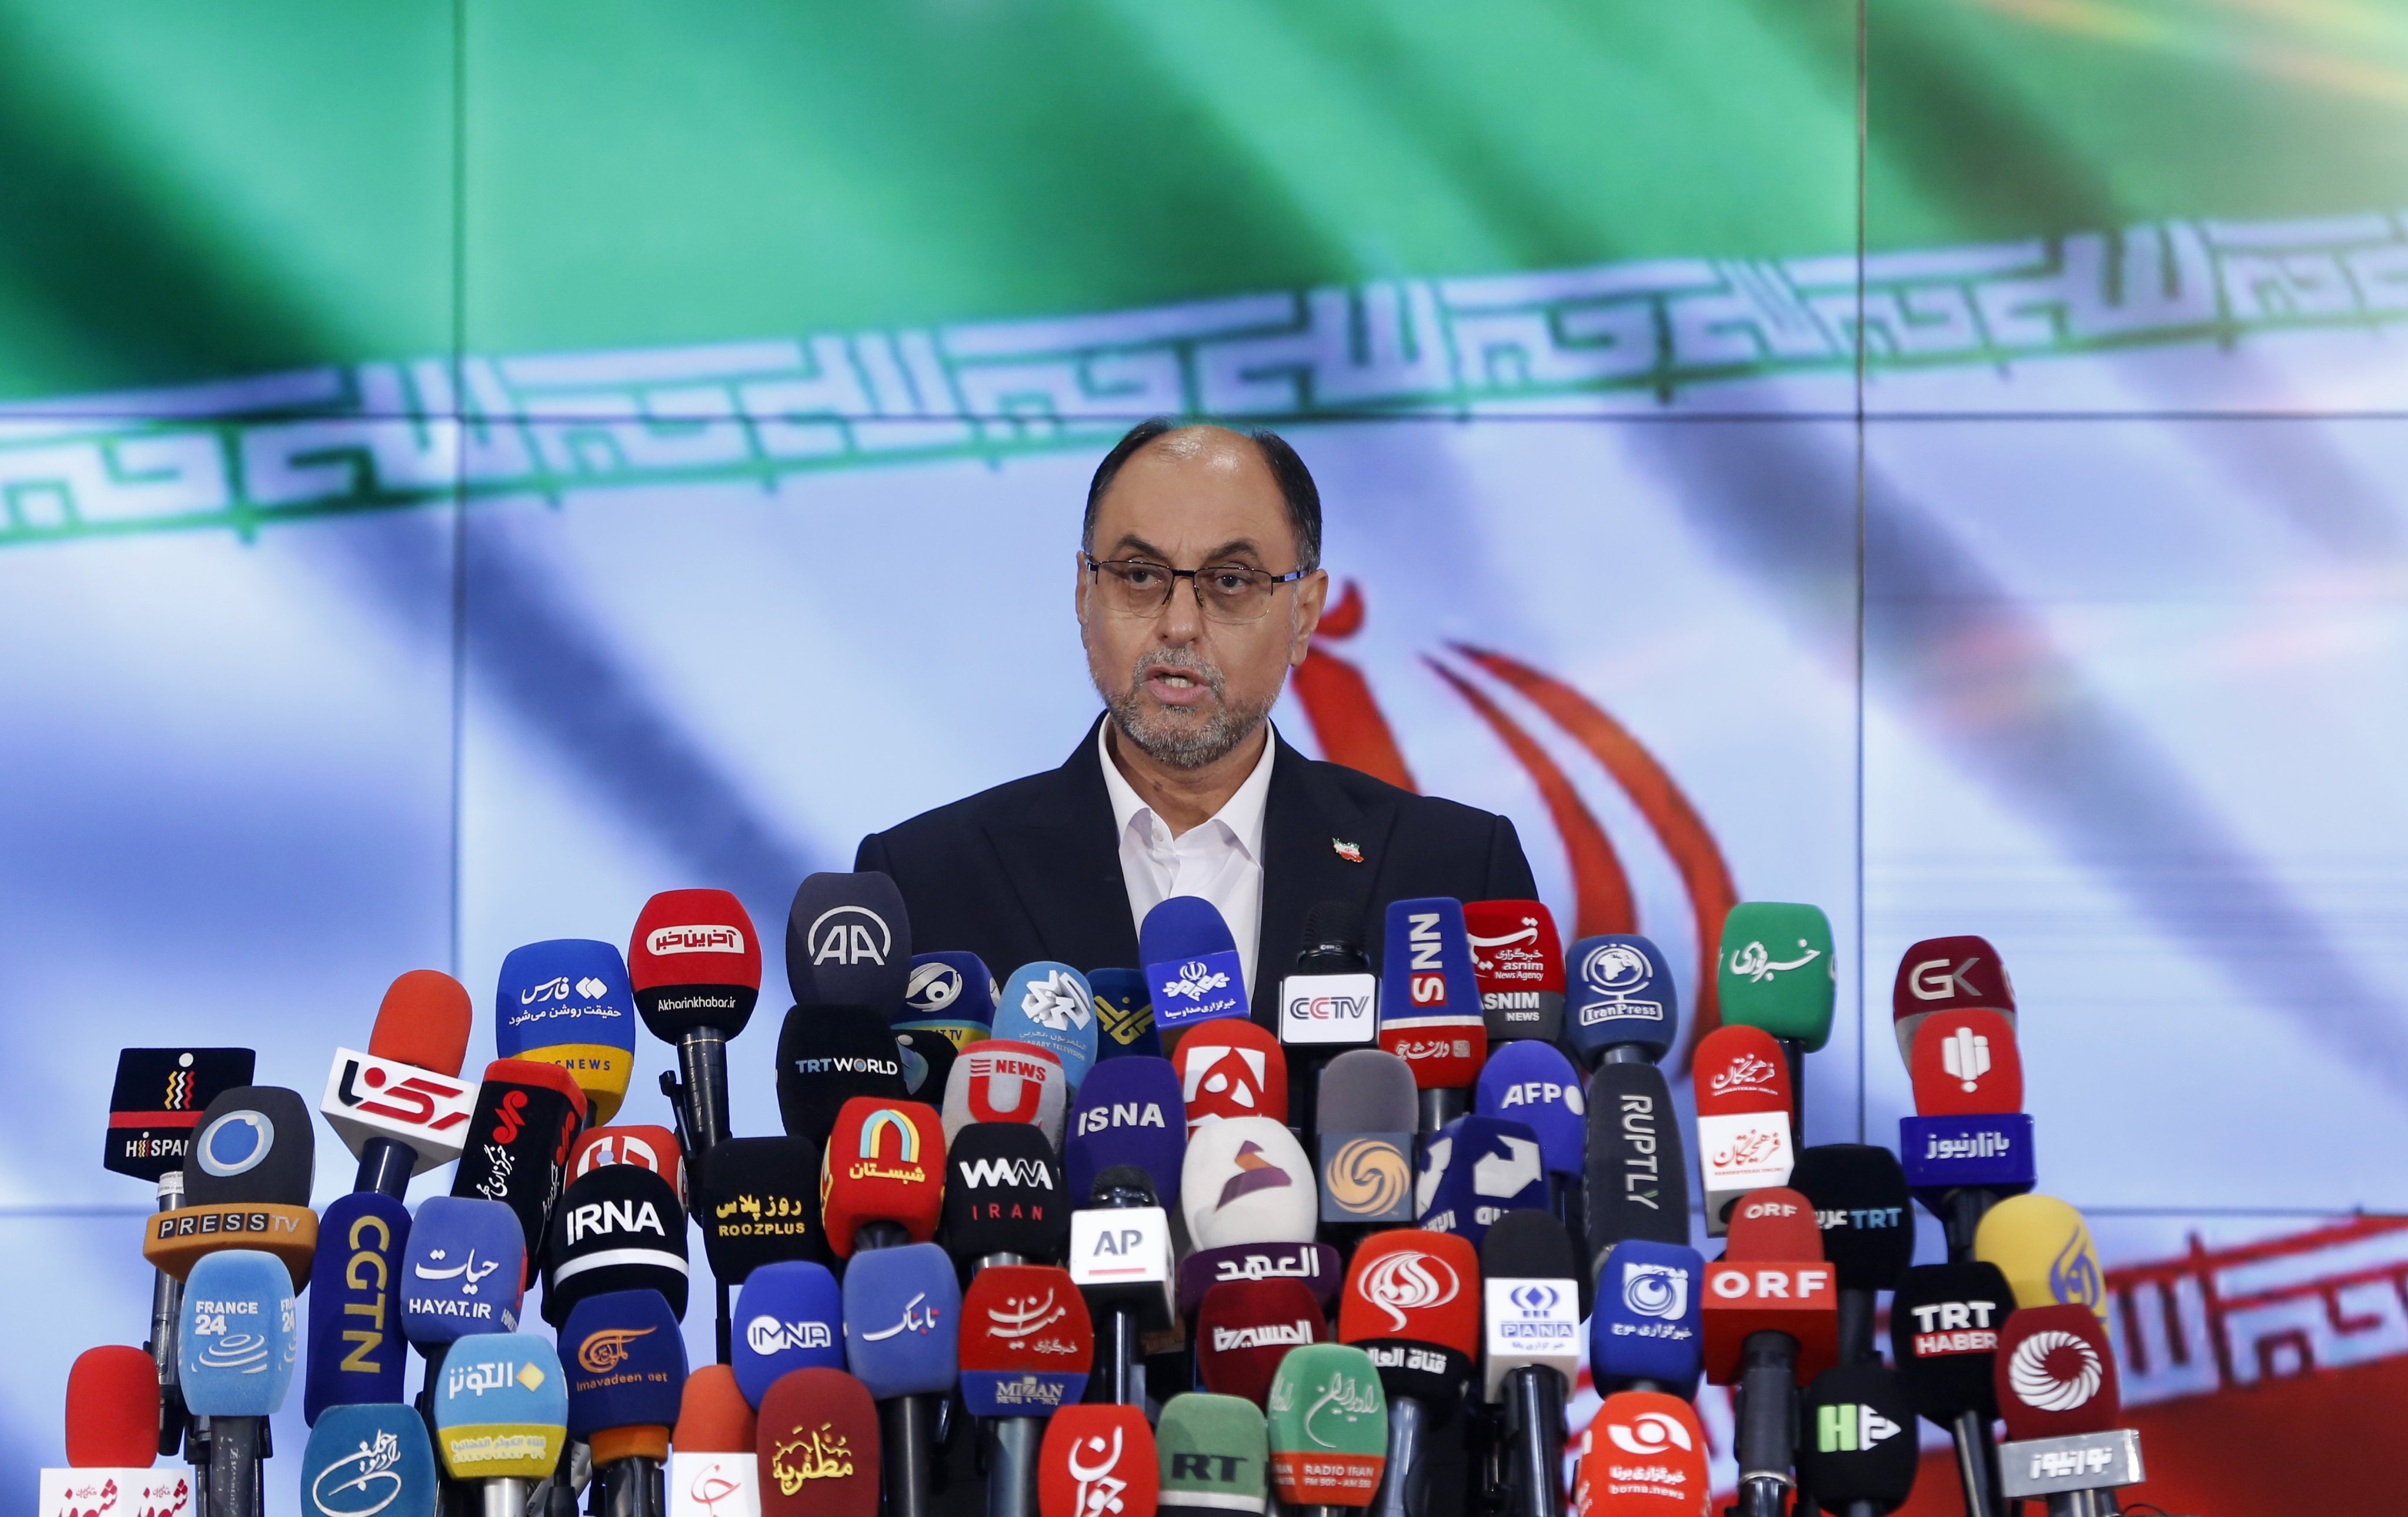 Senior official of Iranian supreme leader office Vahid Haghanian speaks after registering his candidacy for the Iranian presidential election at the Interior Ministry in Tehran. Iran will hold presidential election on June 28. Photo: EPA-EFE